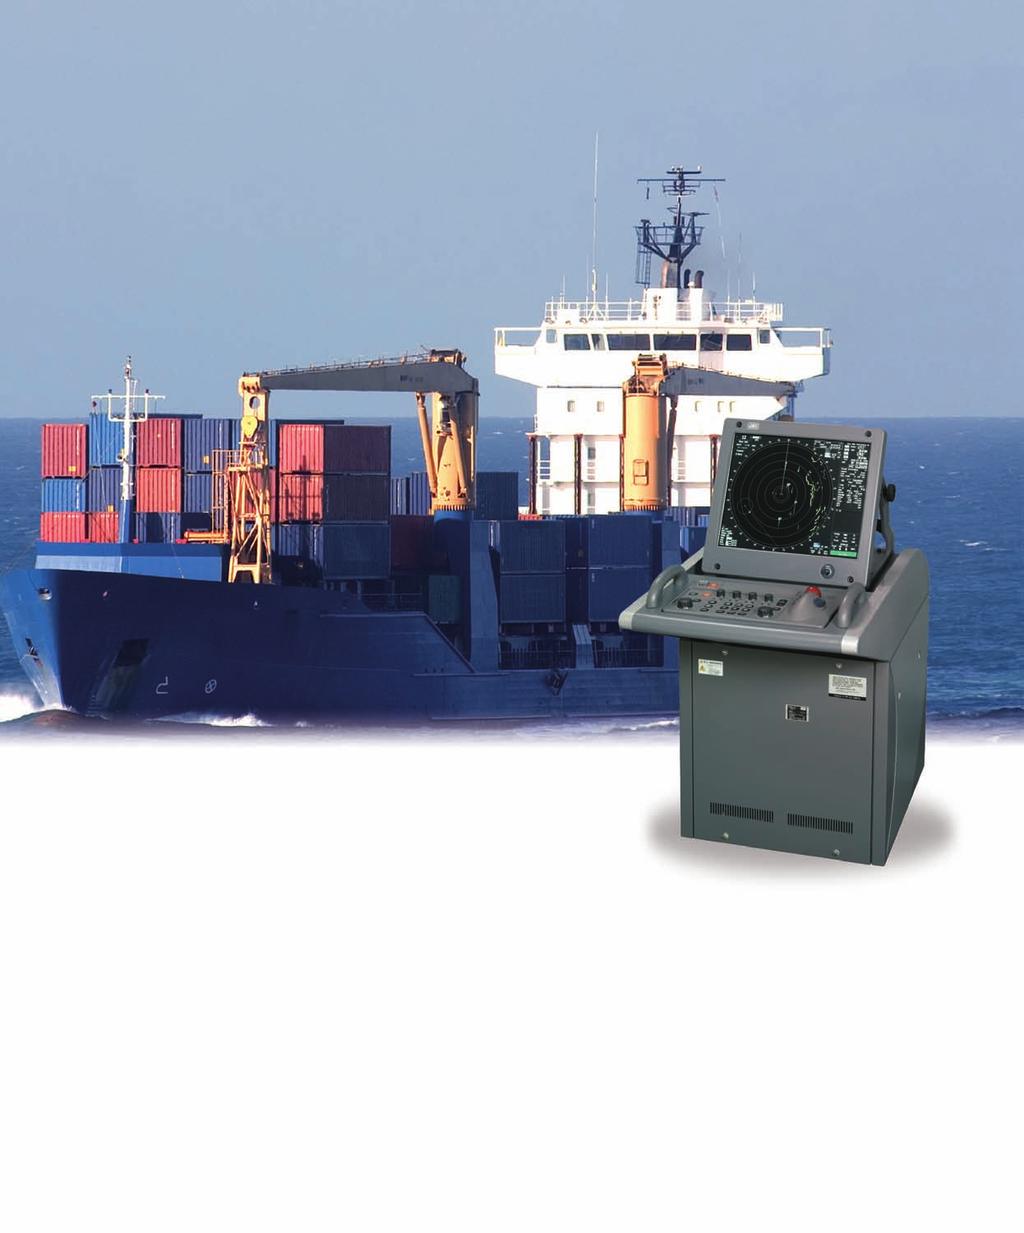 ARPA radar Complies with SOLAS carriage requirements for vessels under 10.000 GT. and fully meets MSC 192(79) radar performance standards effective from 1 July 2008.